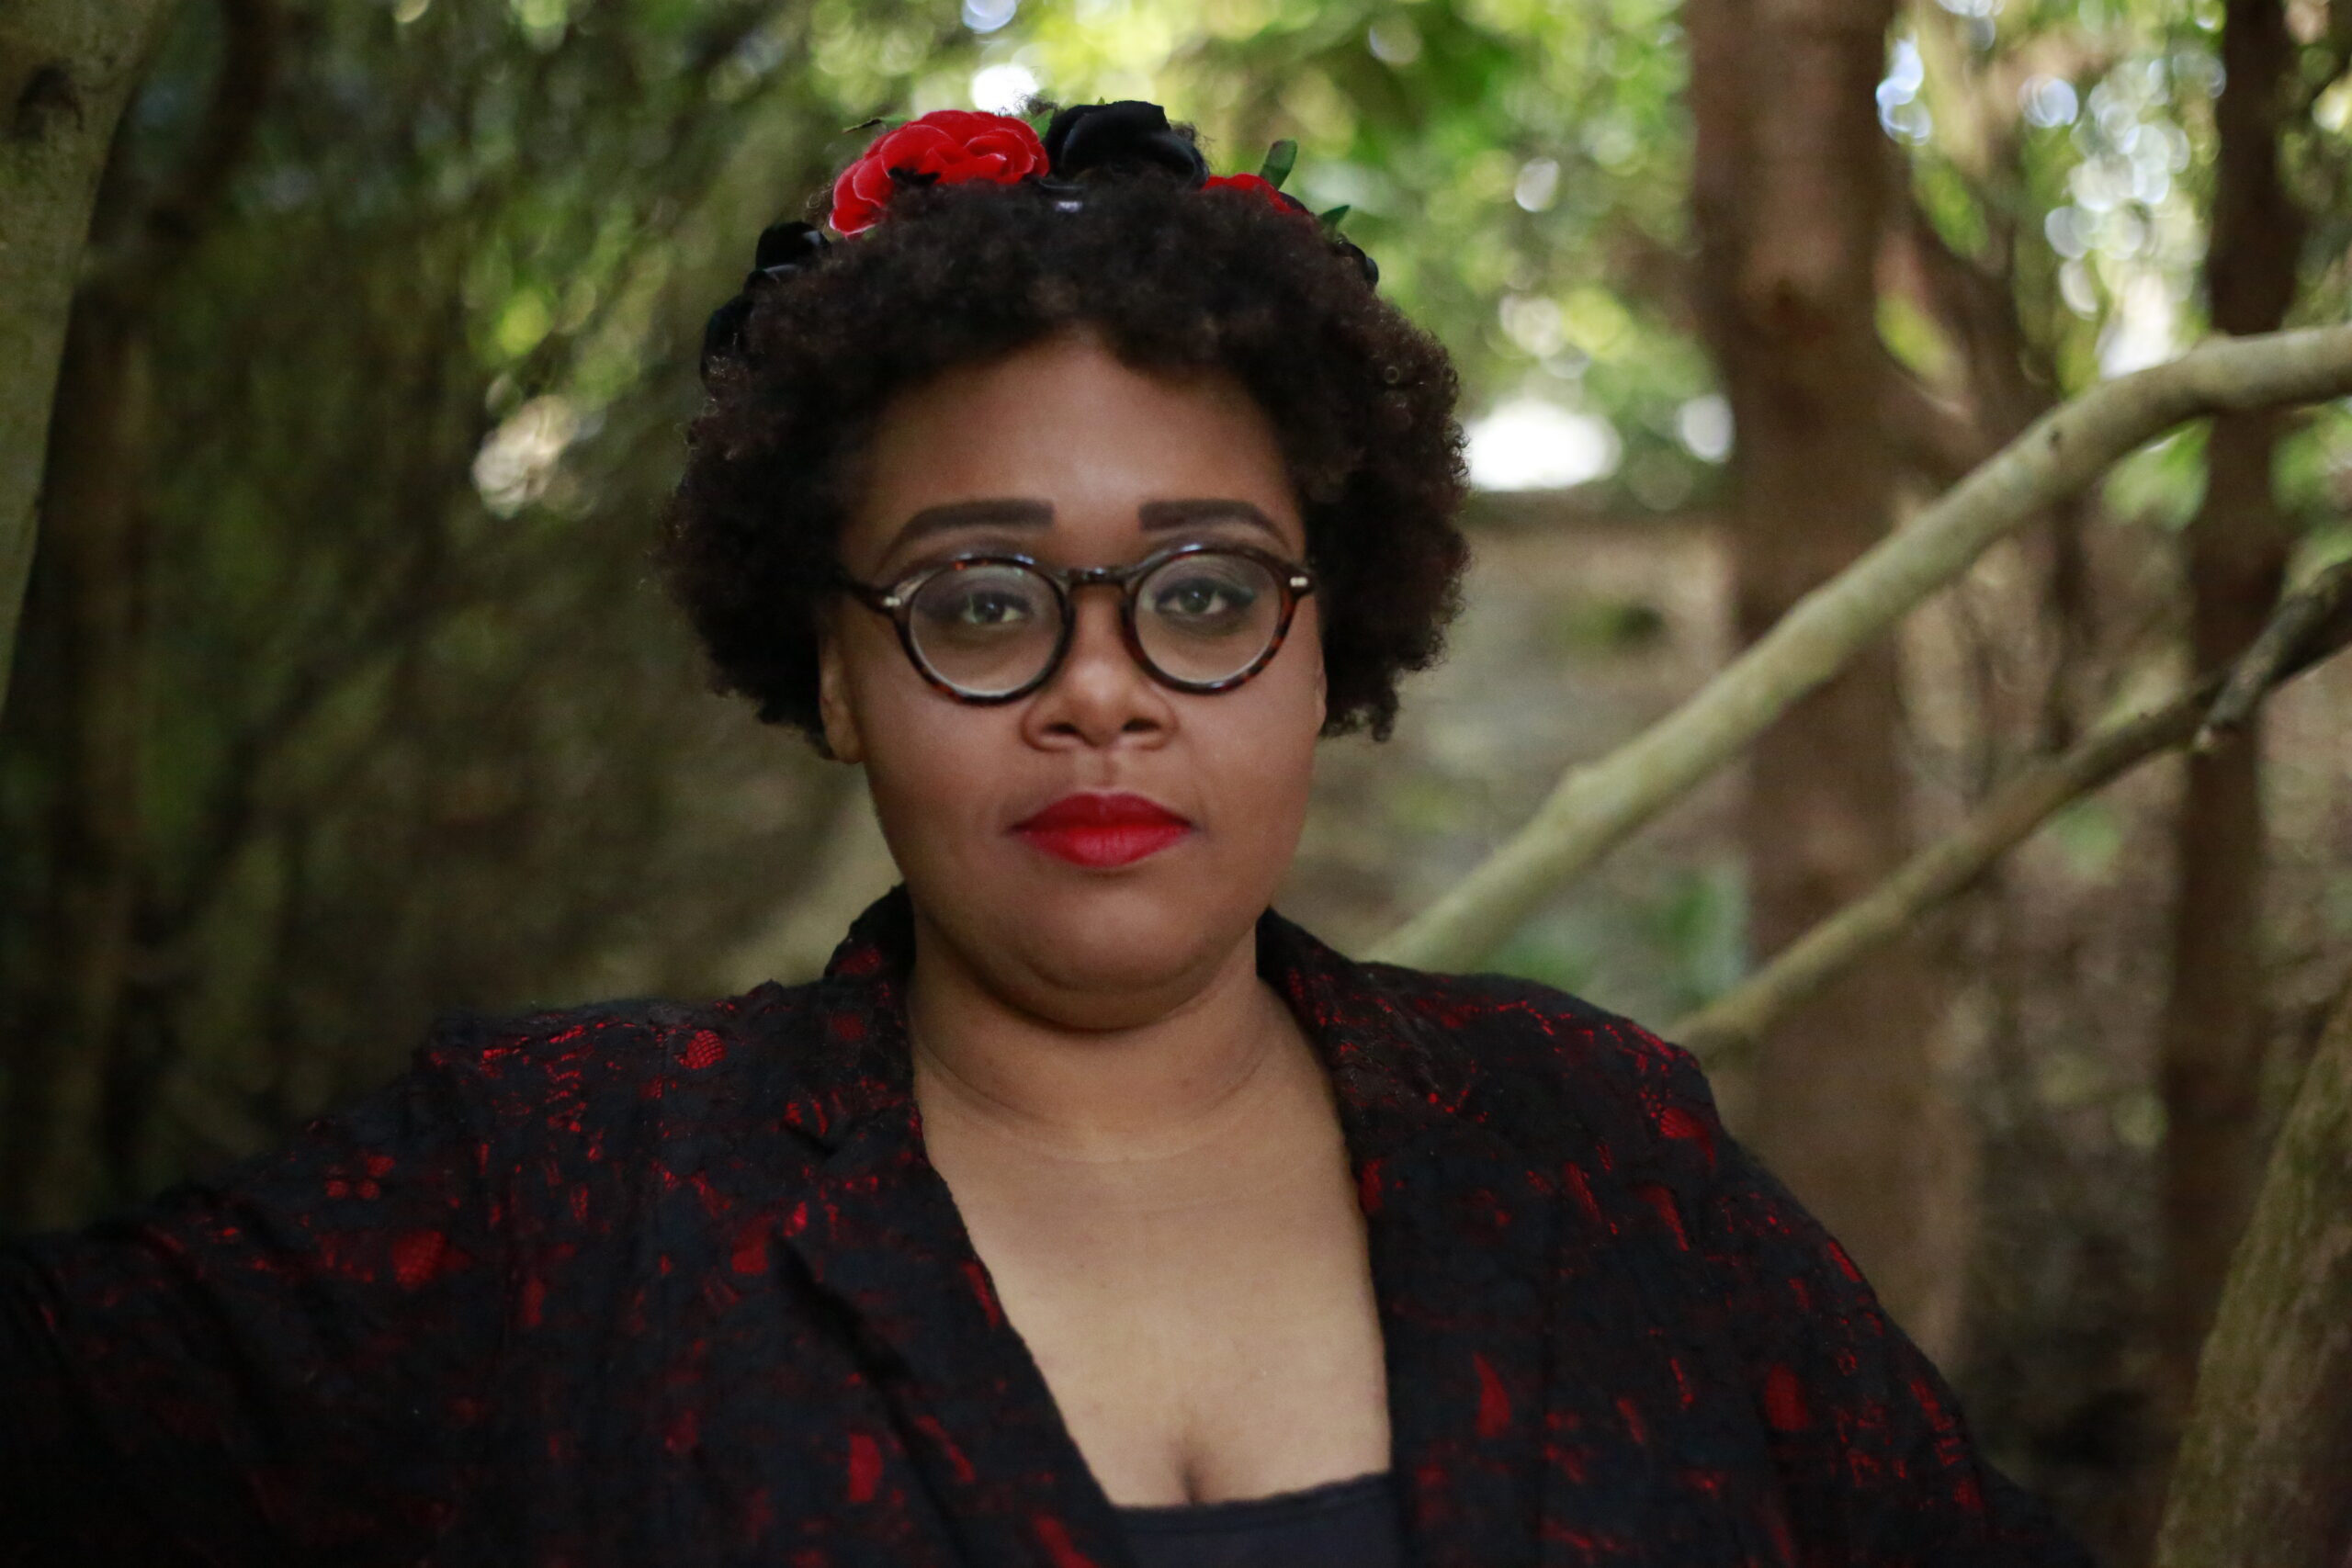 A portrait of Darienne standing in front of some tree. She is wearing a red and black floral crown and a black and red lacy blazer. Her fully made up face is unsmiling but features kind eyes